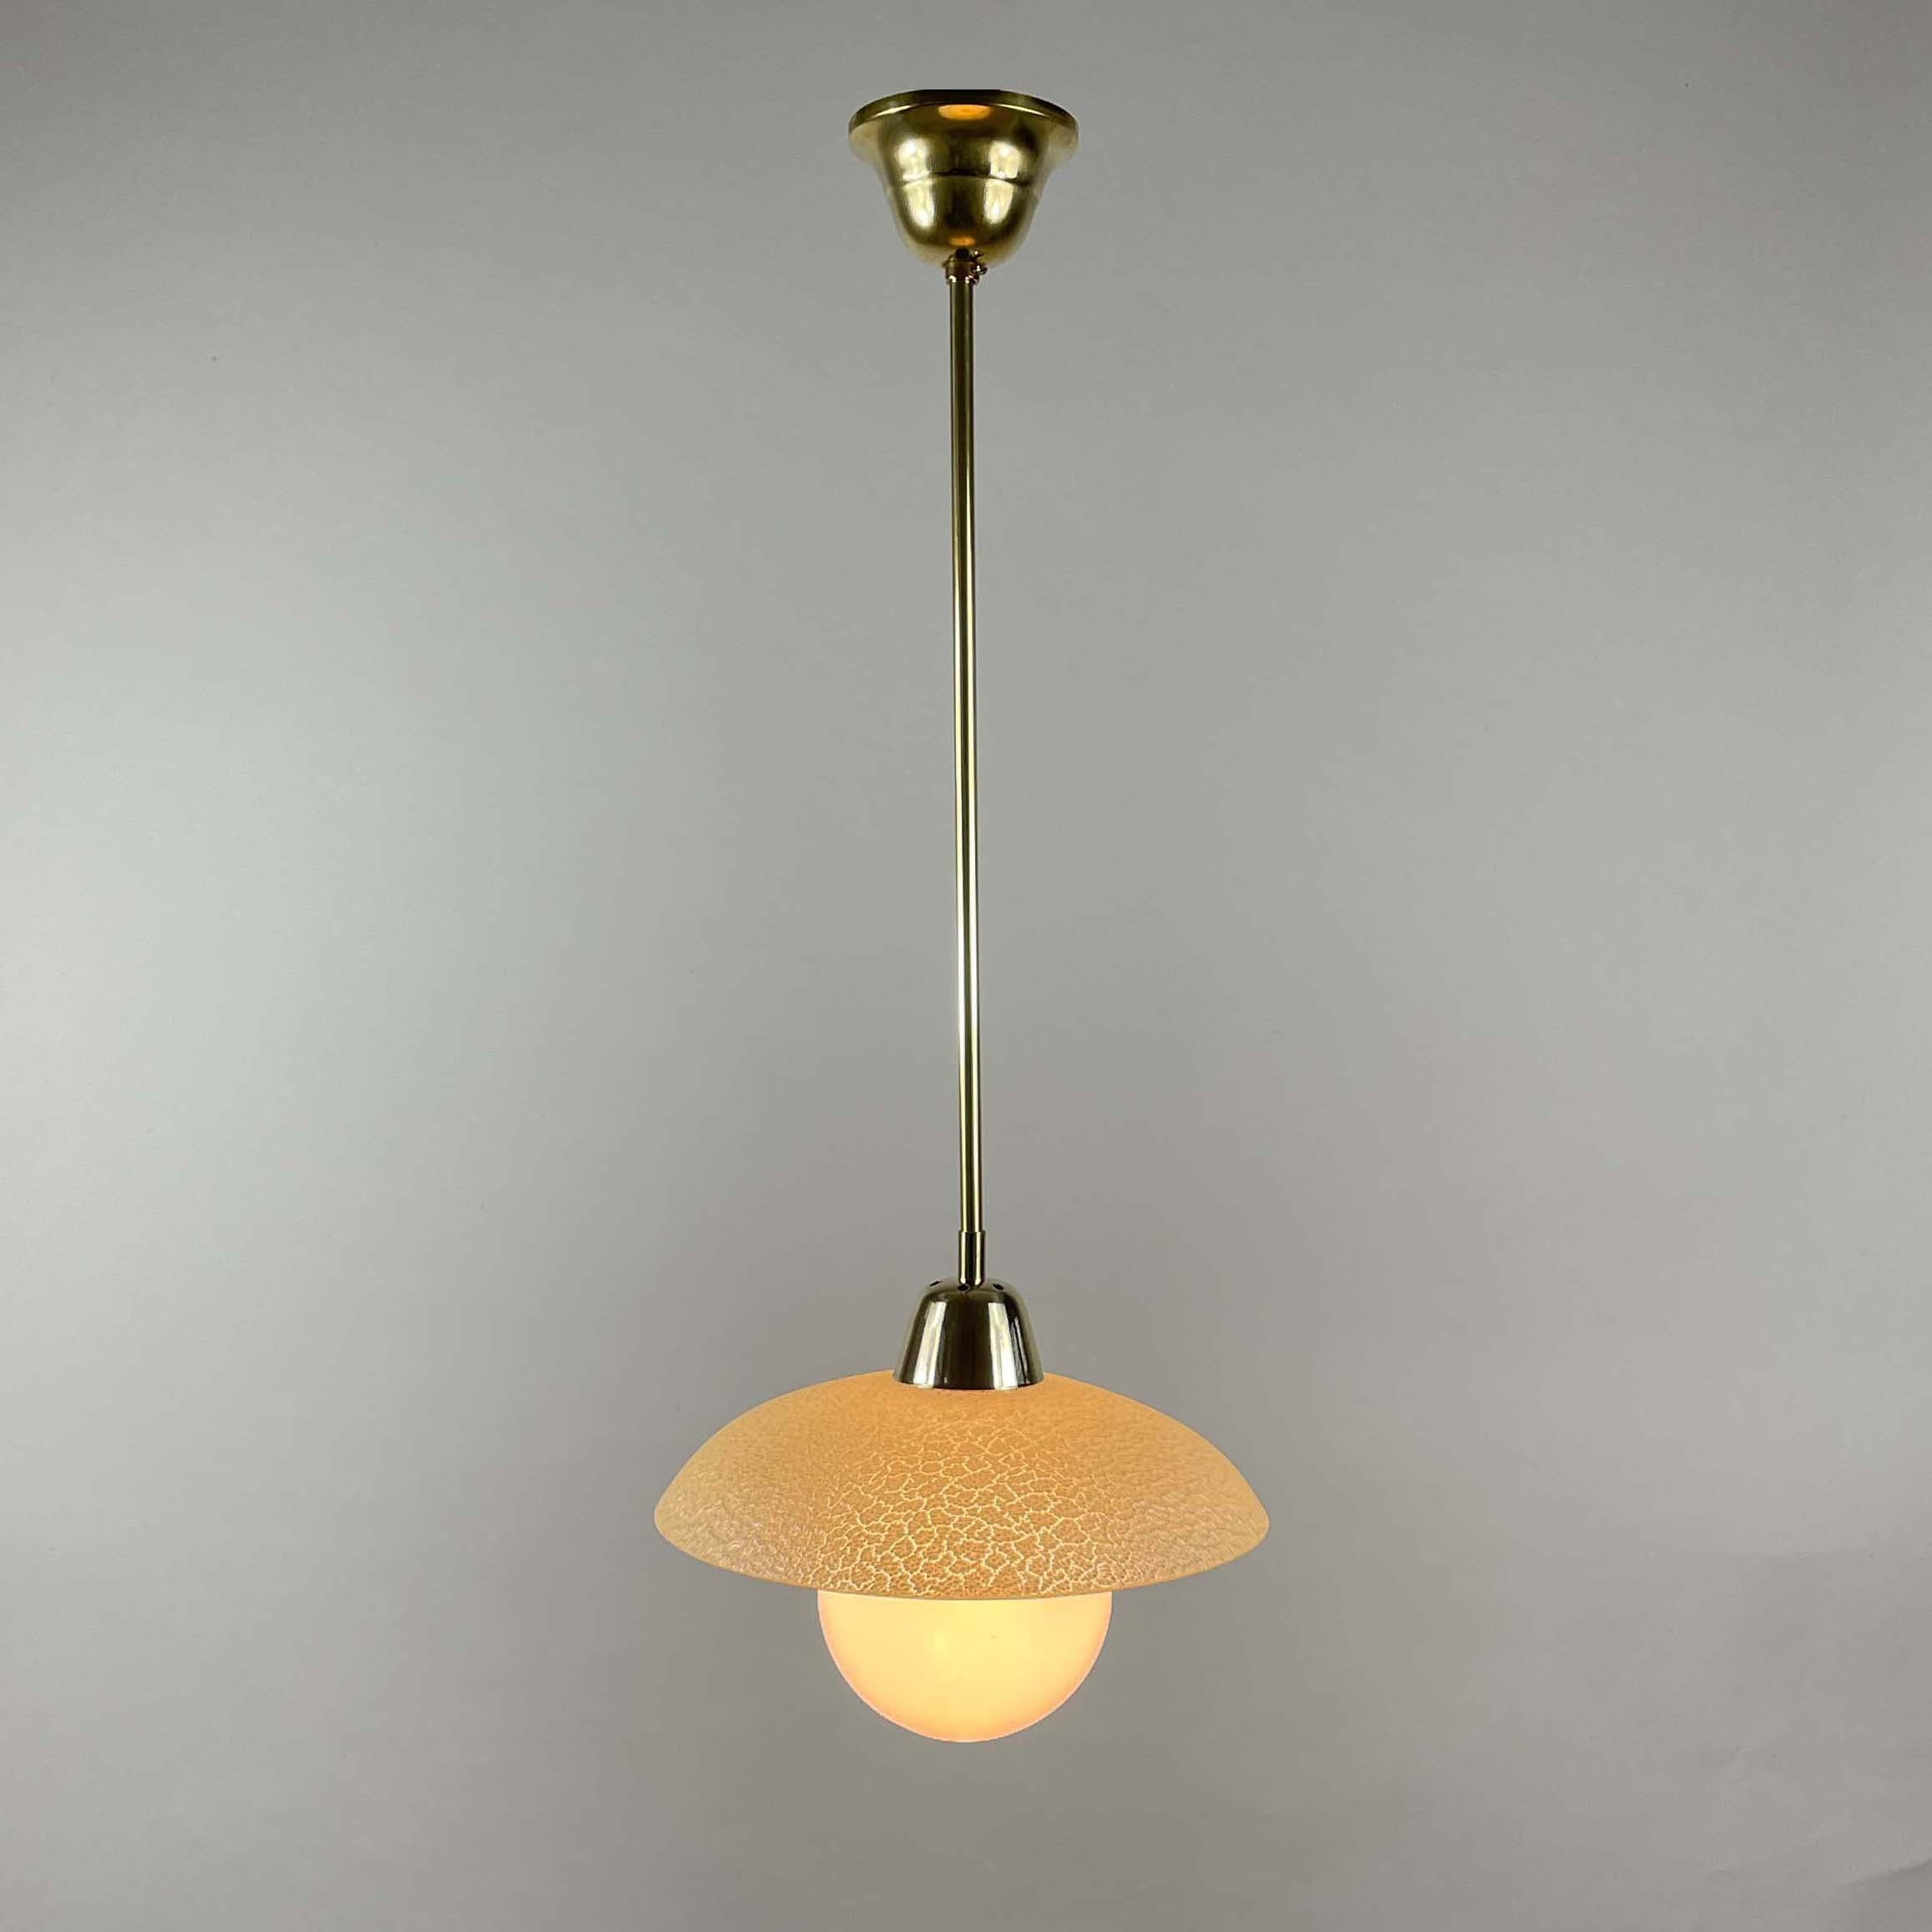 Cream Textured Glass and Brass Pendants, Sweden 1940s to 1950s For Sale 9